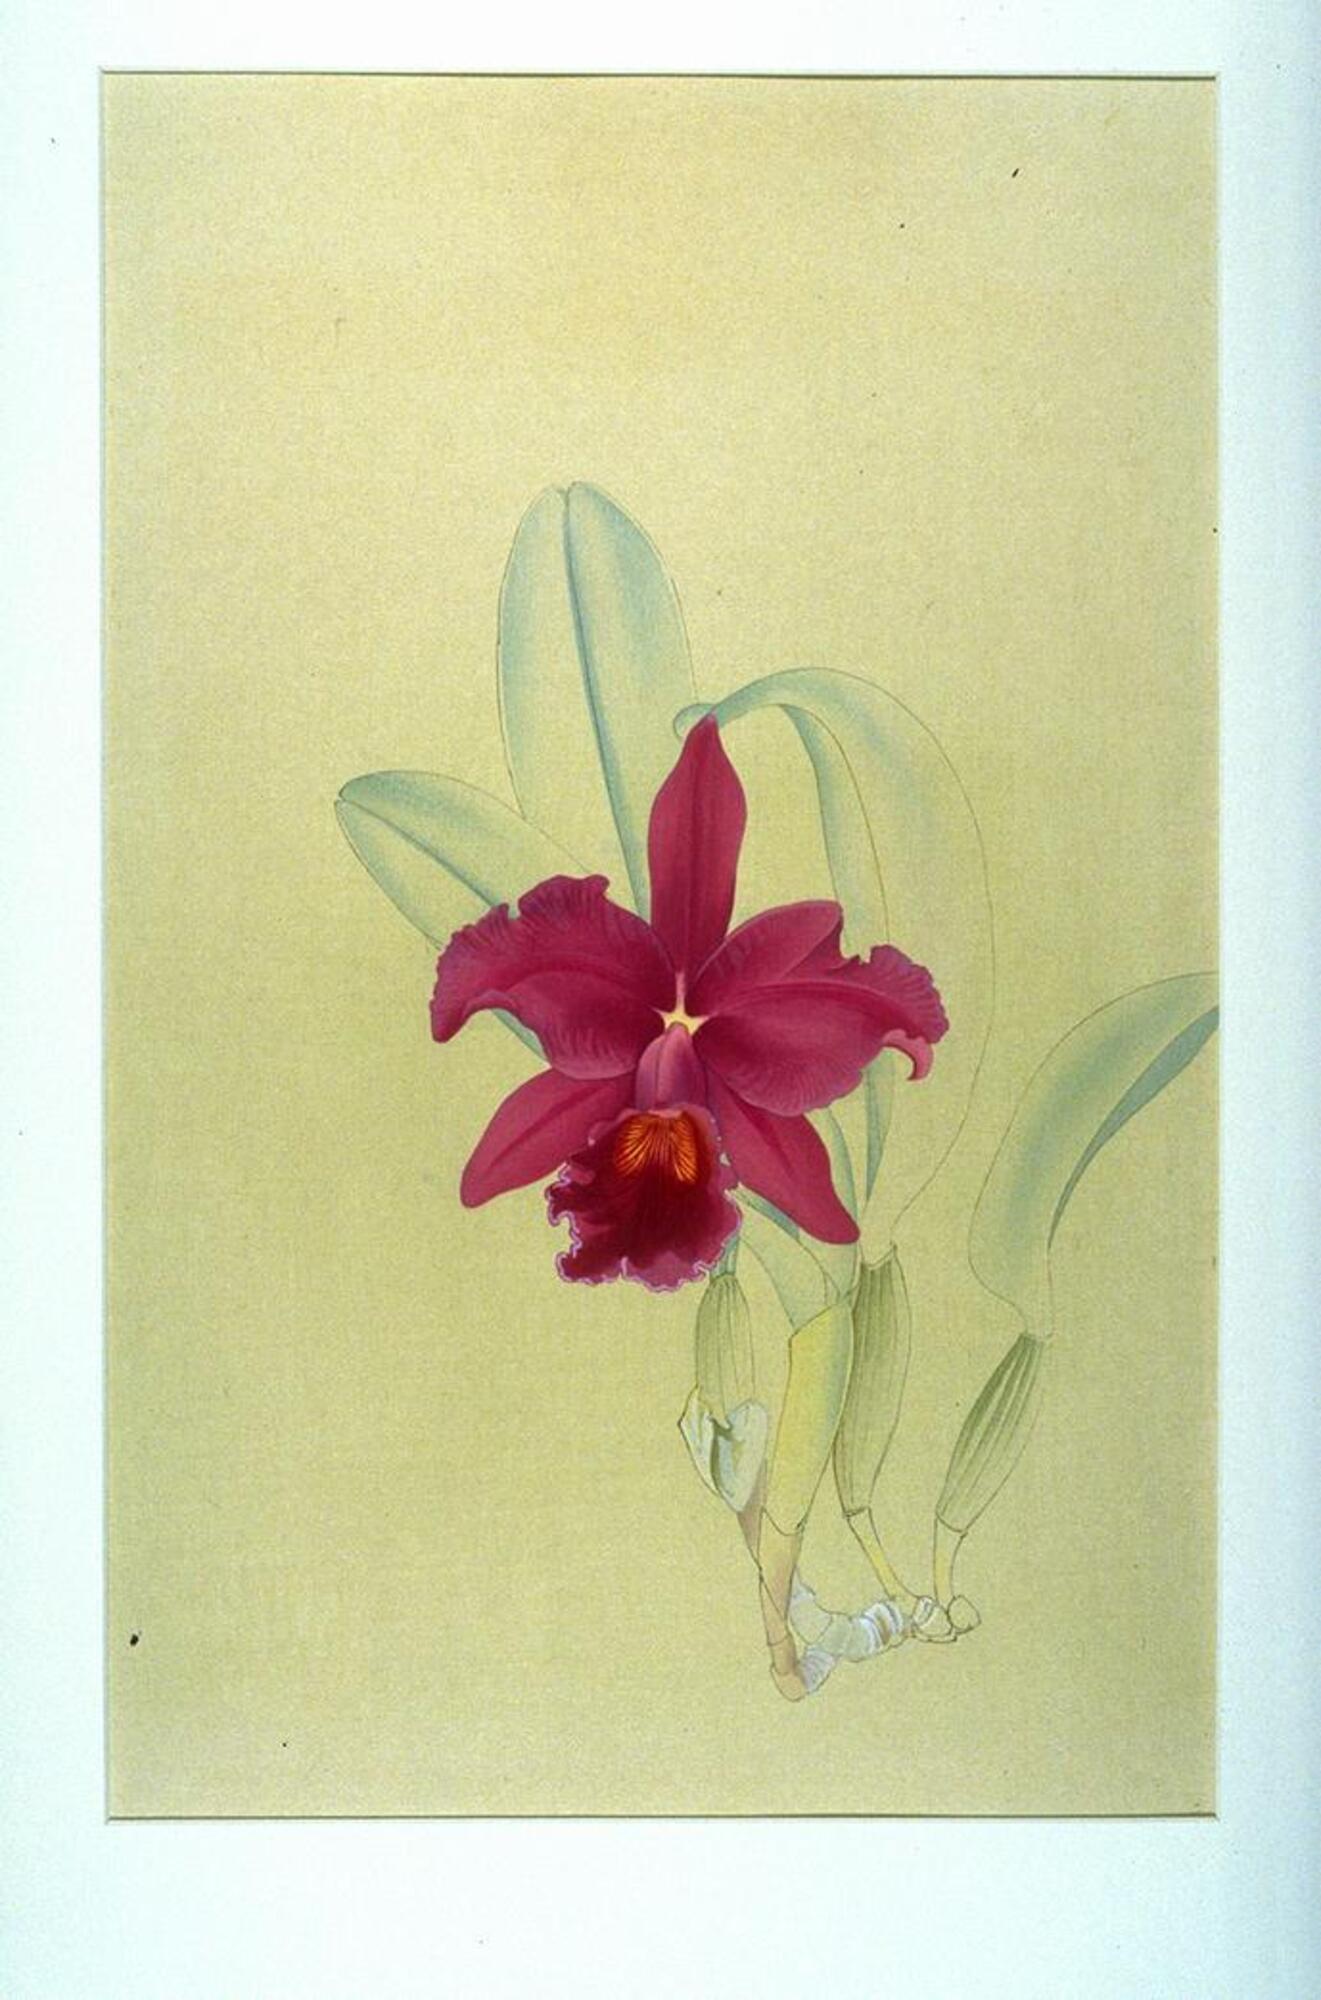 Bright fuschia orchid on a light green background. The leaves are not colored in and are left in a "sketch" form, indicating that this was one of the unfinished images from the collection.